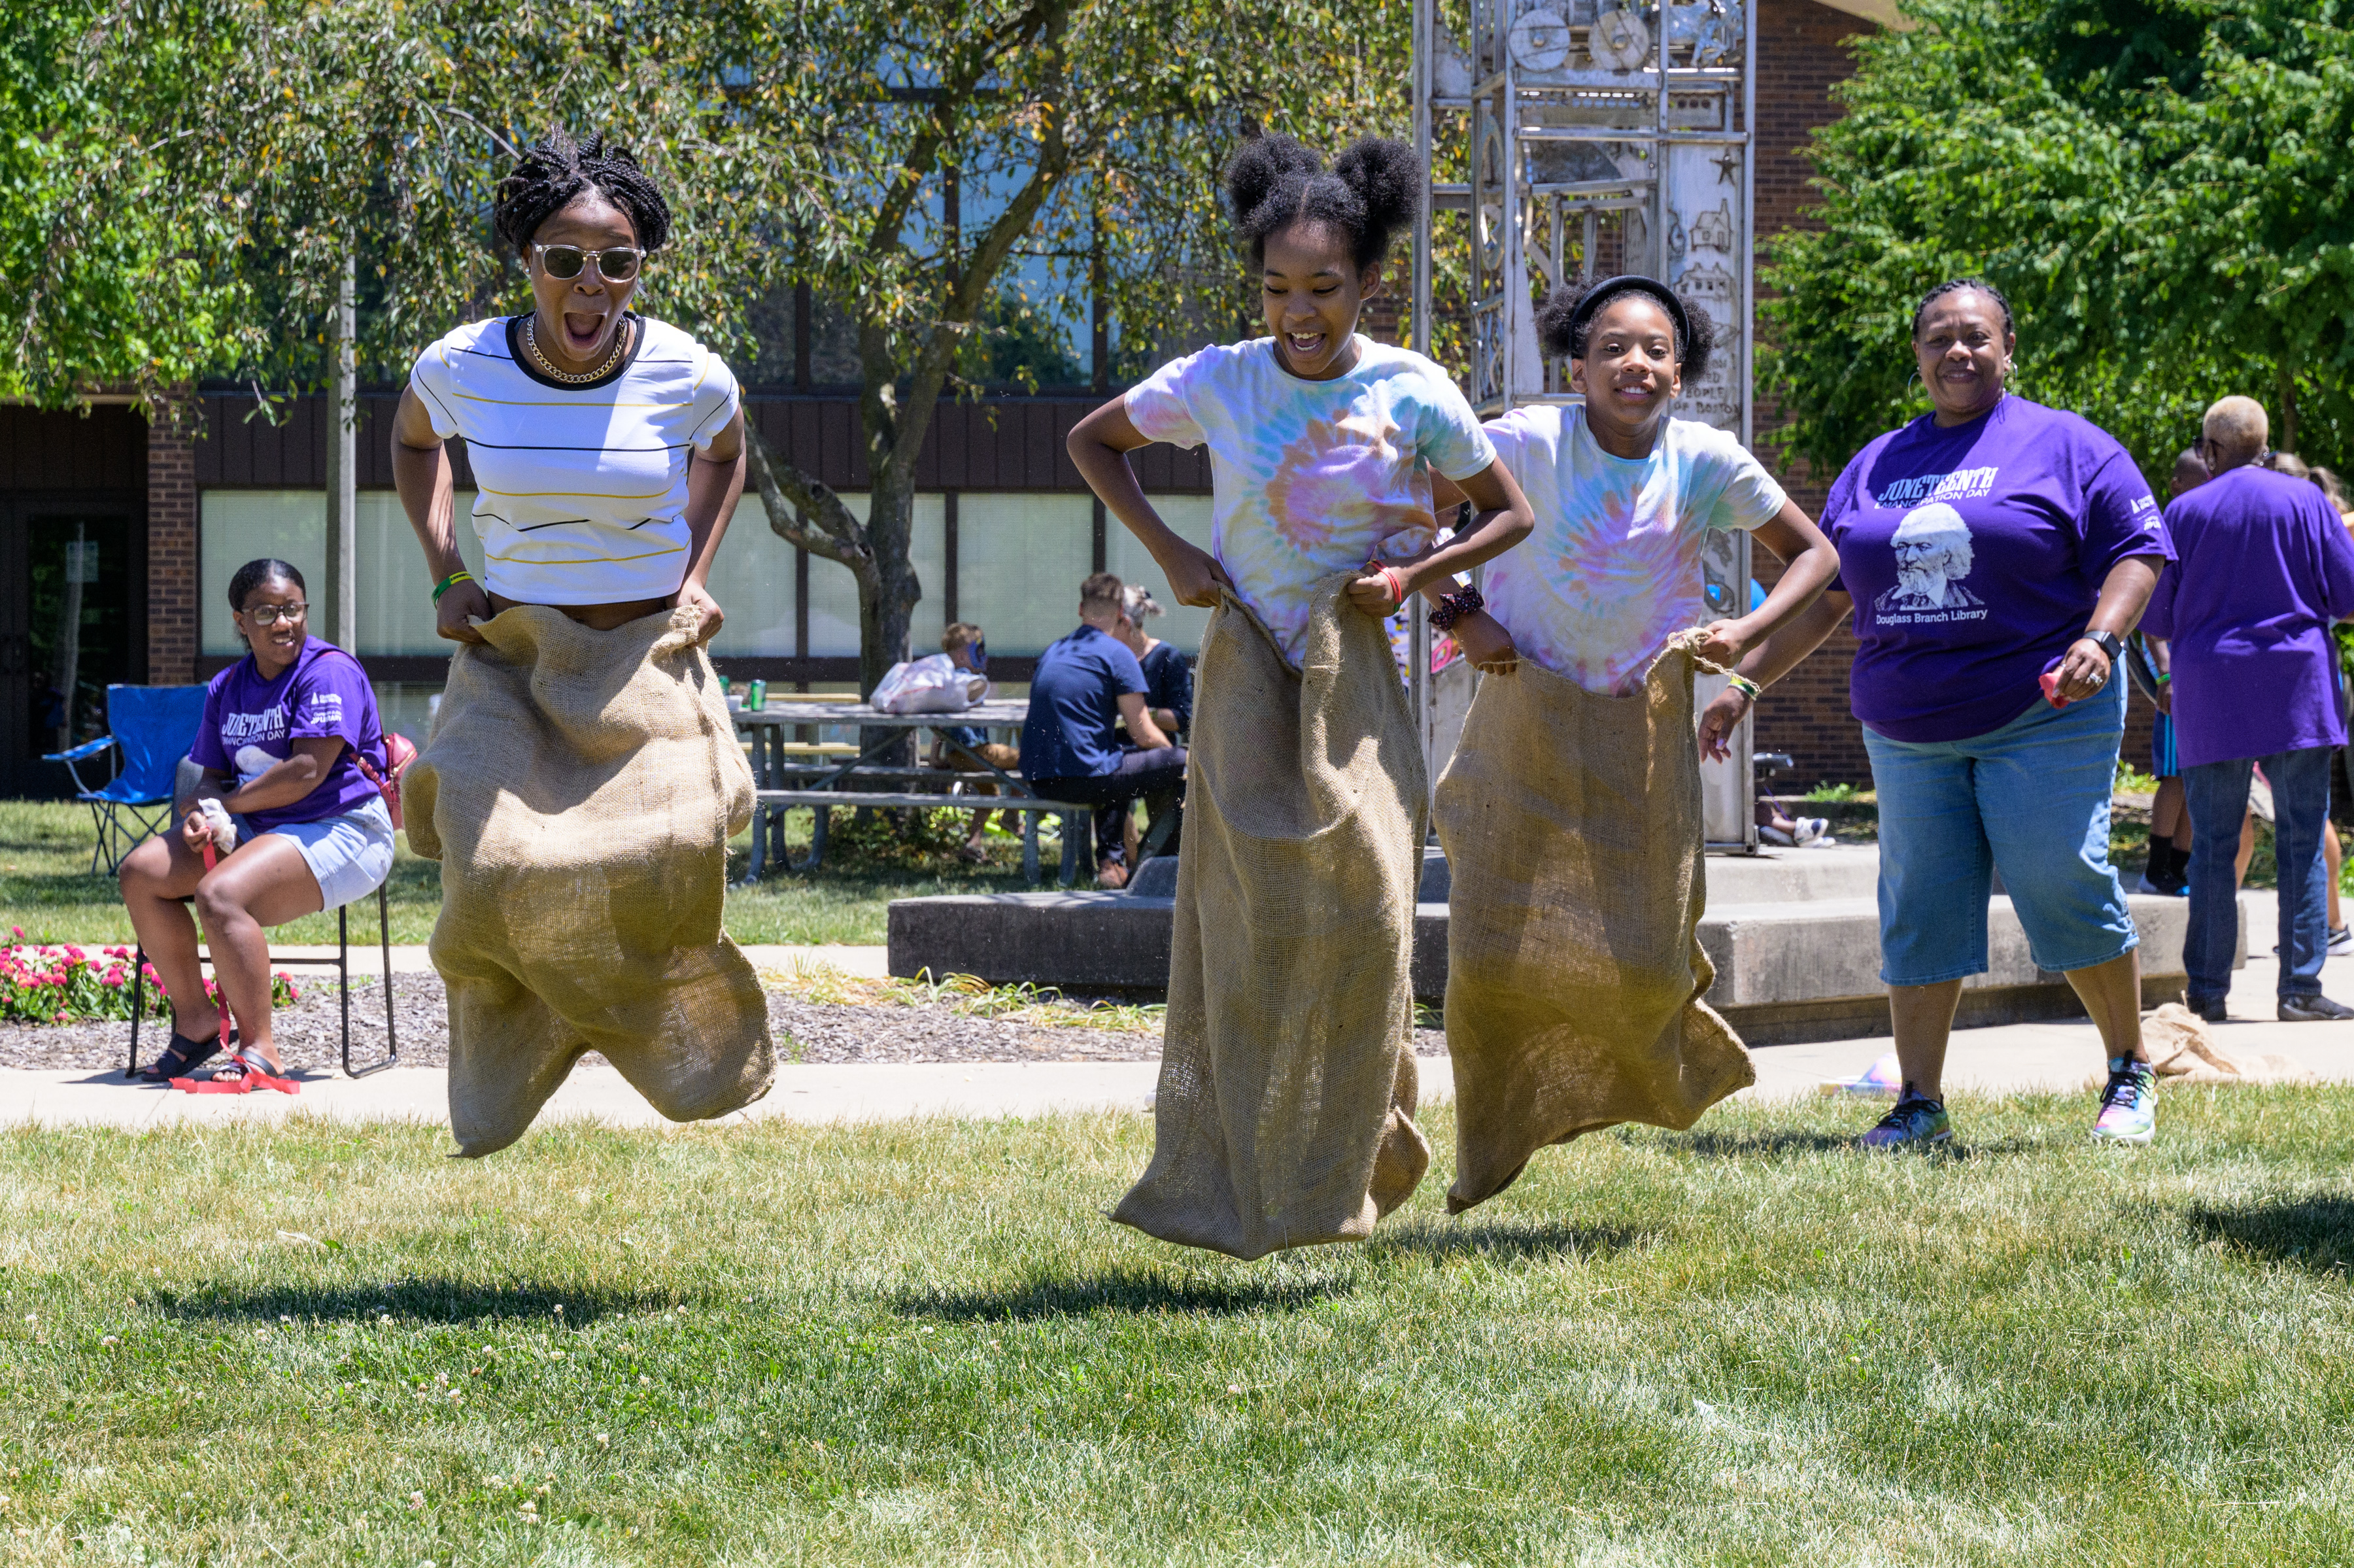 woman, two girls, jumping in  potato sack race in park